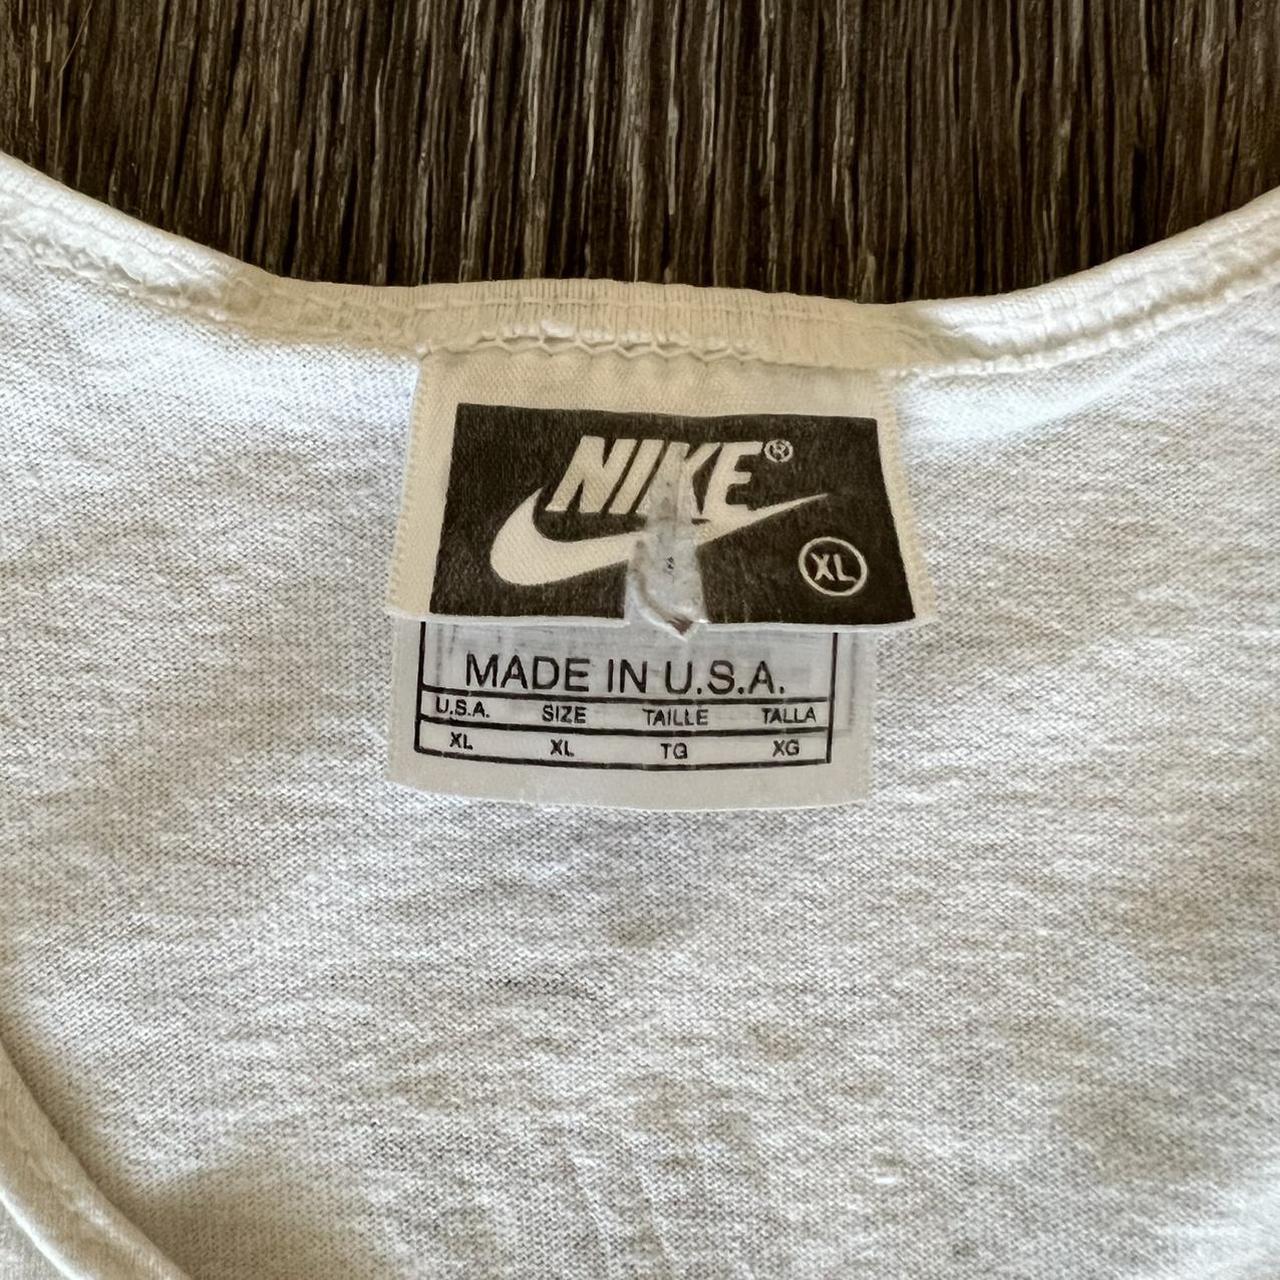 Product Image 4 - Vintage Nike made in USA